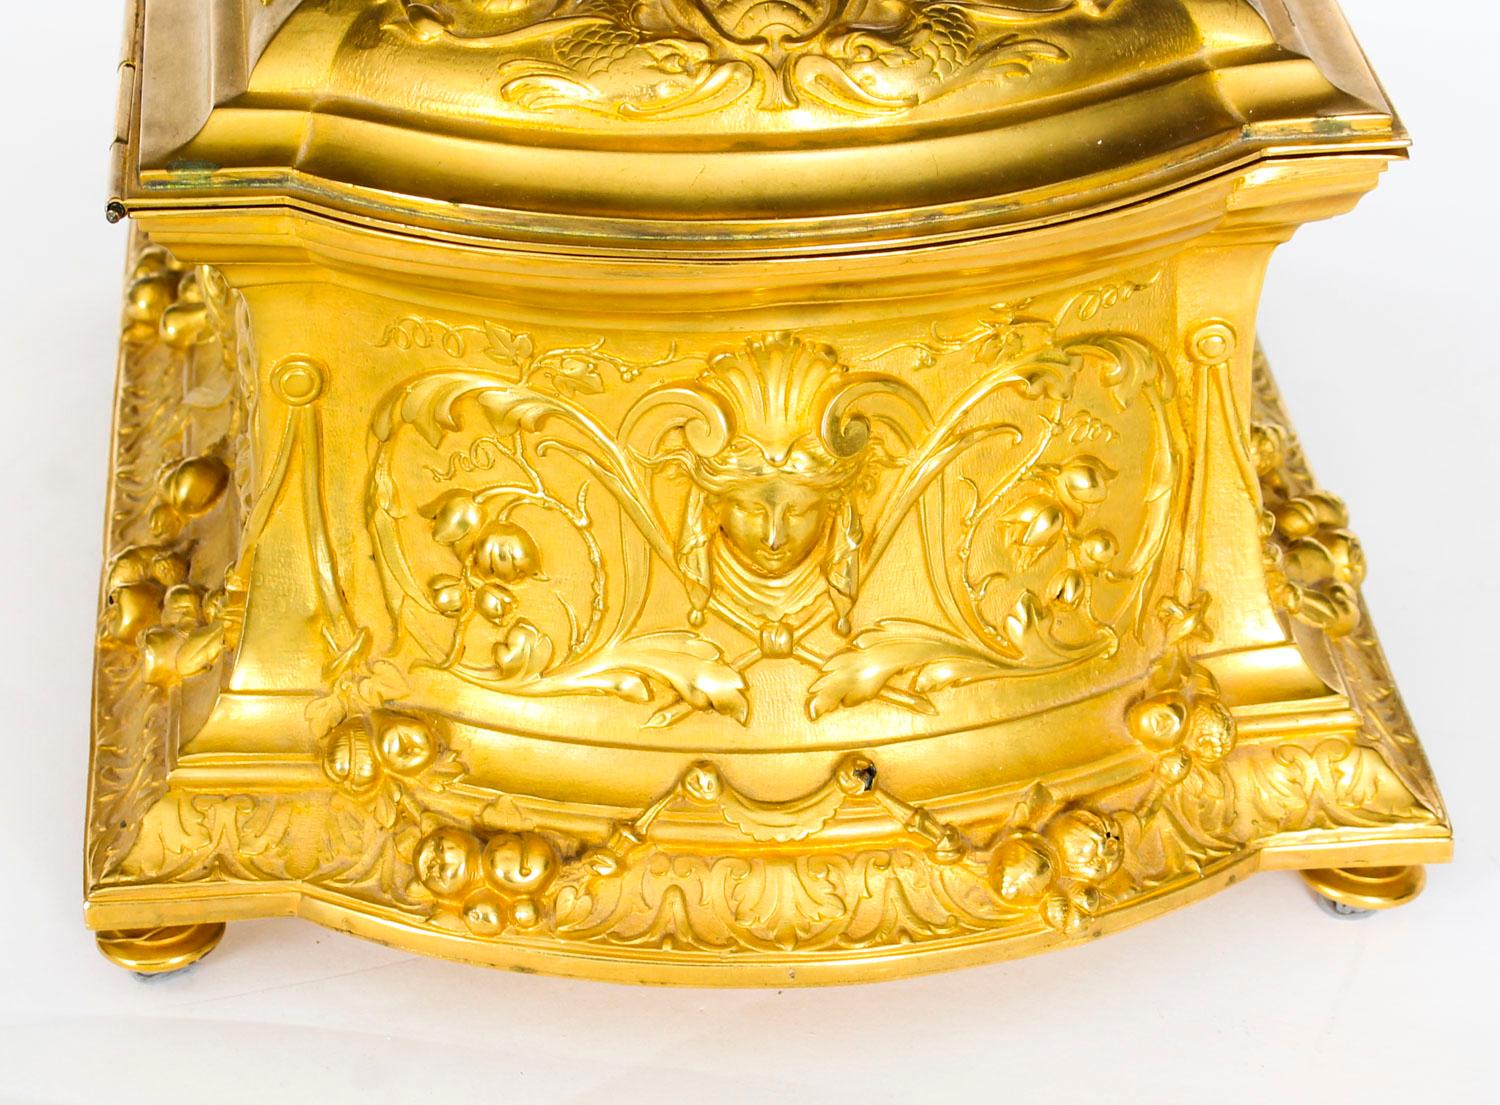 Antique French Ormolu Casket with Cupid, 19th Century 3